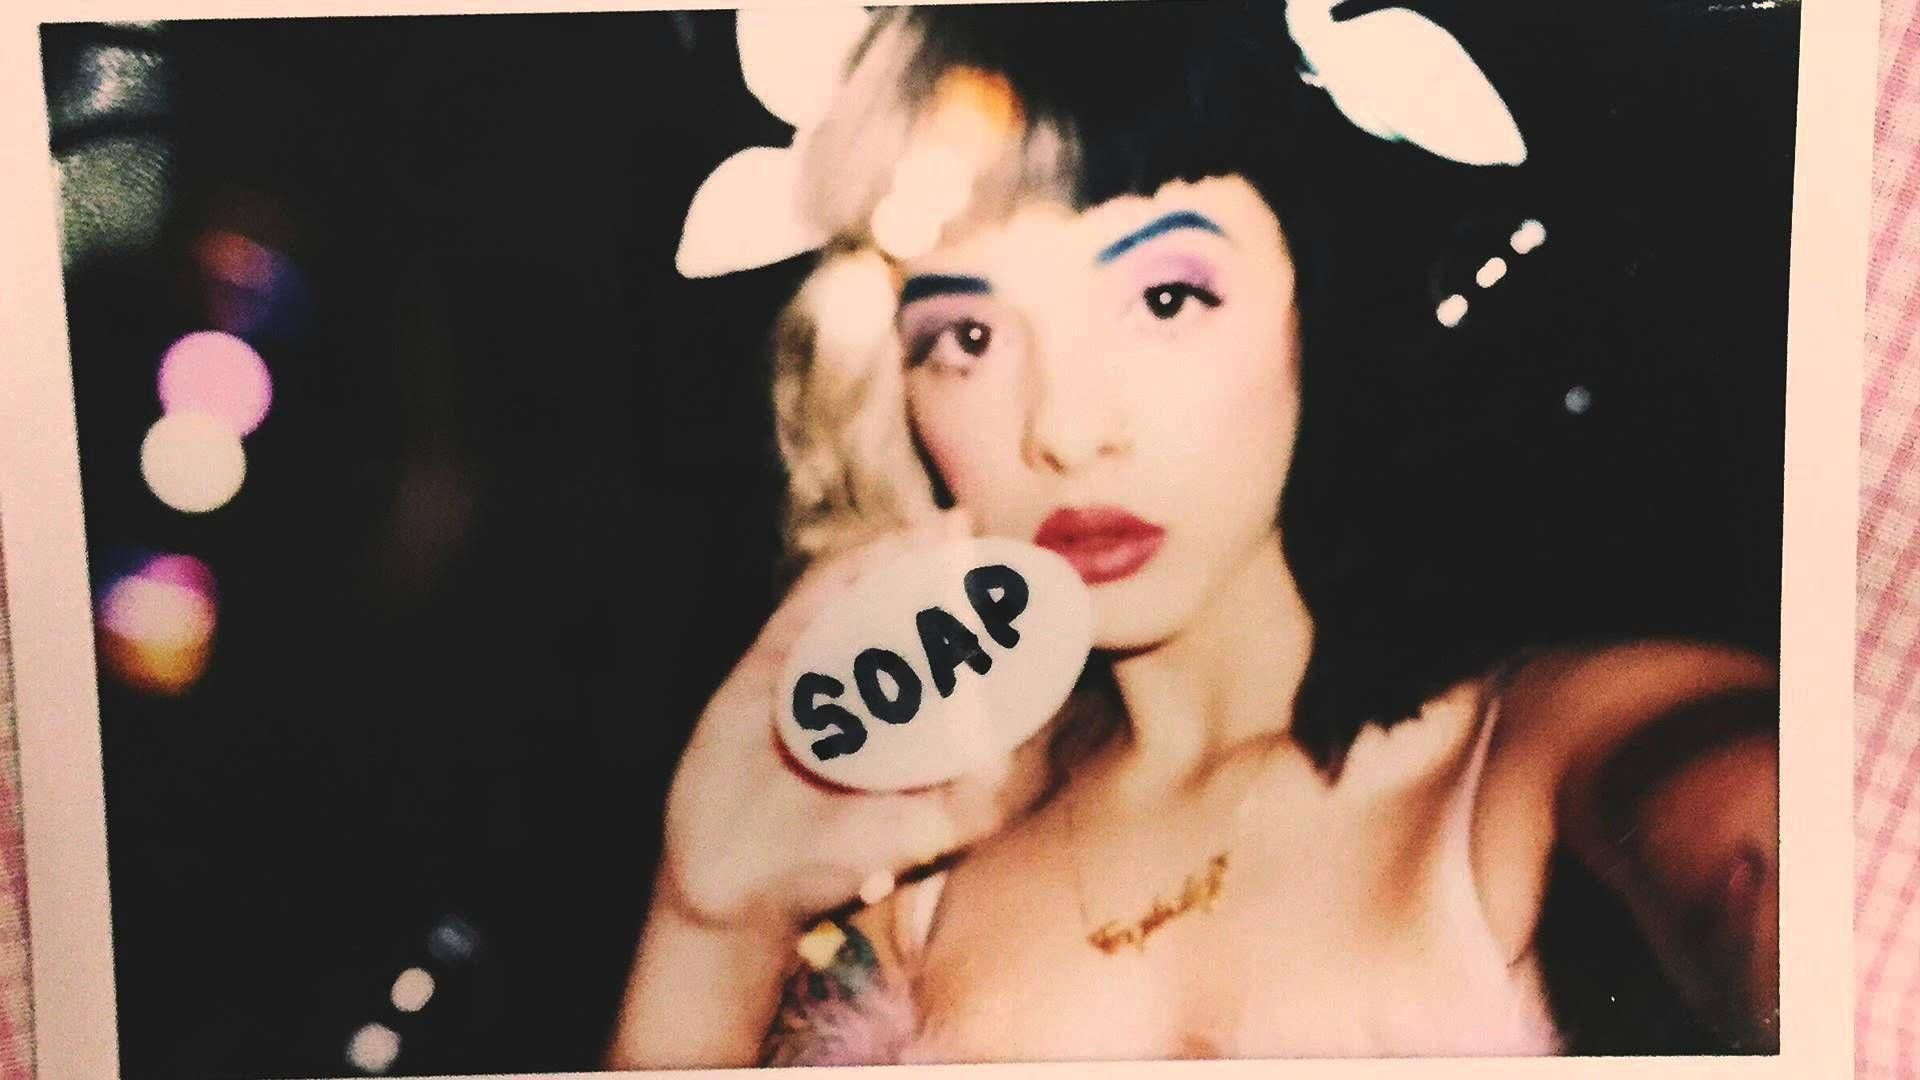 A woman holding up soap in front of her face - Melanie Martinez